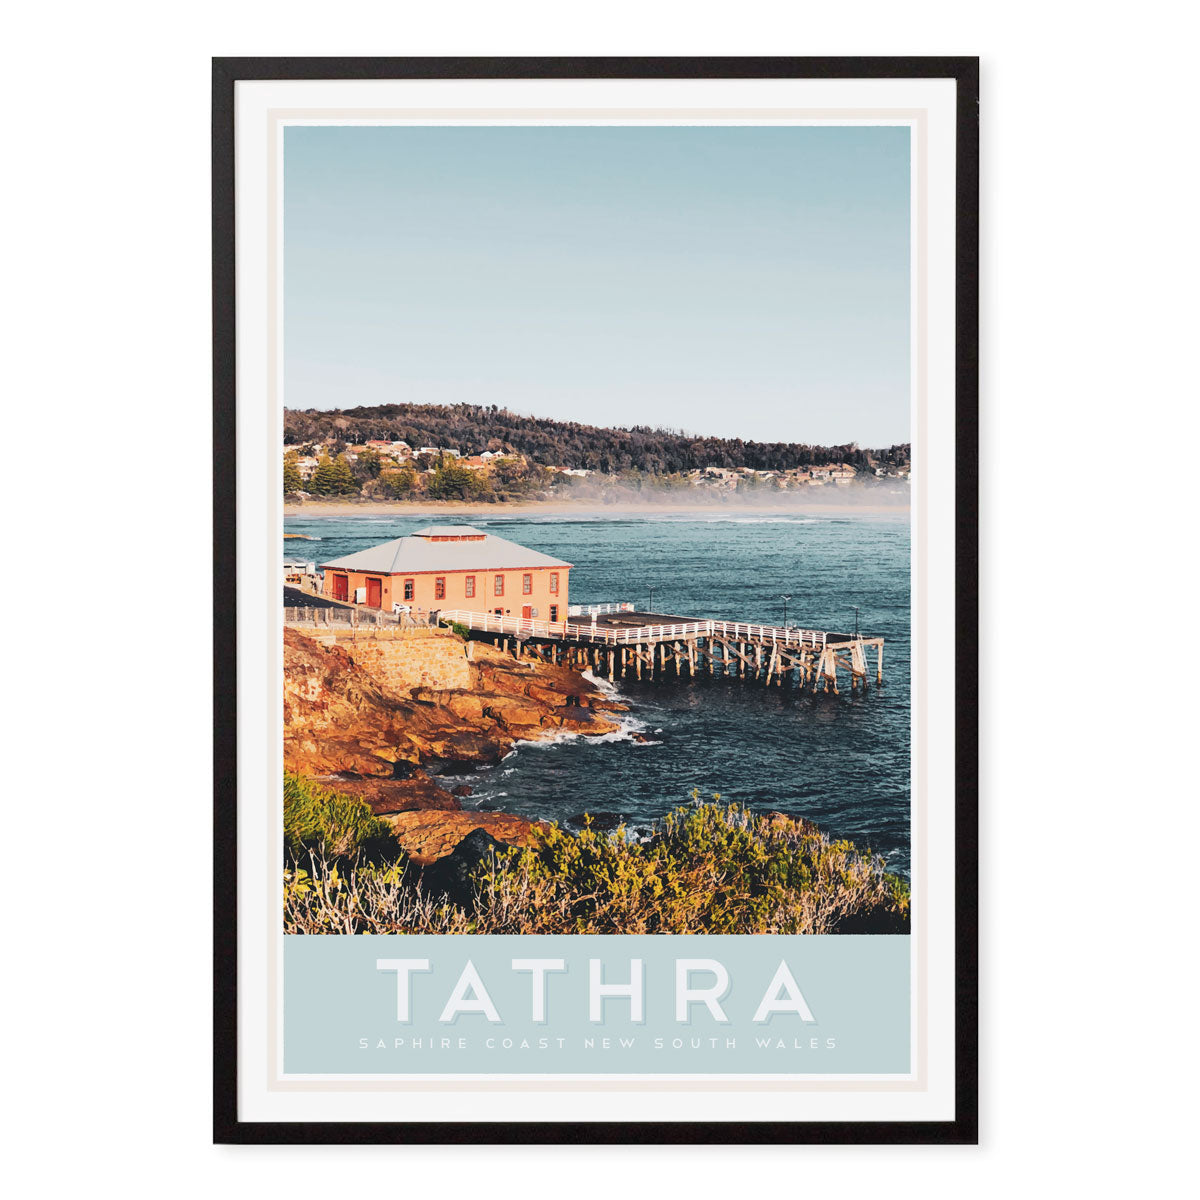 Framed Tathra NSW vintage retro travel poster by Places we Luv 